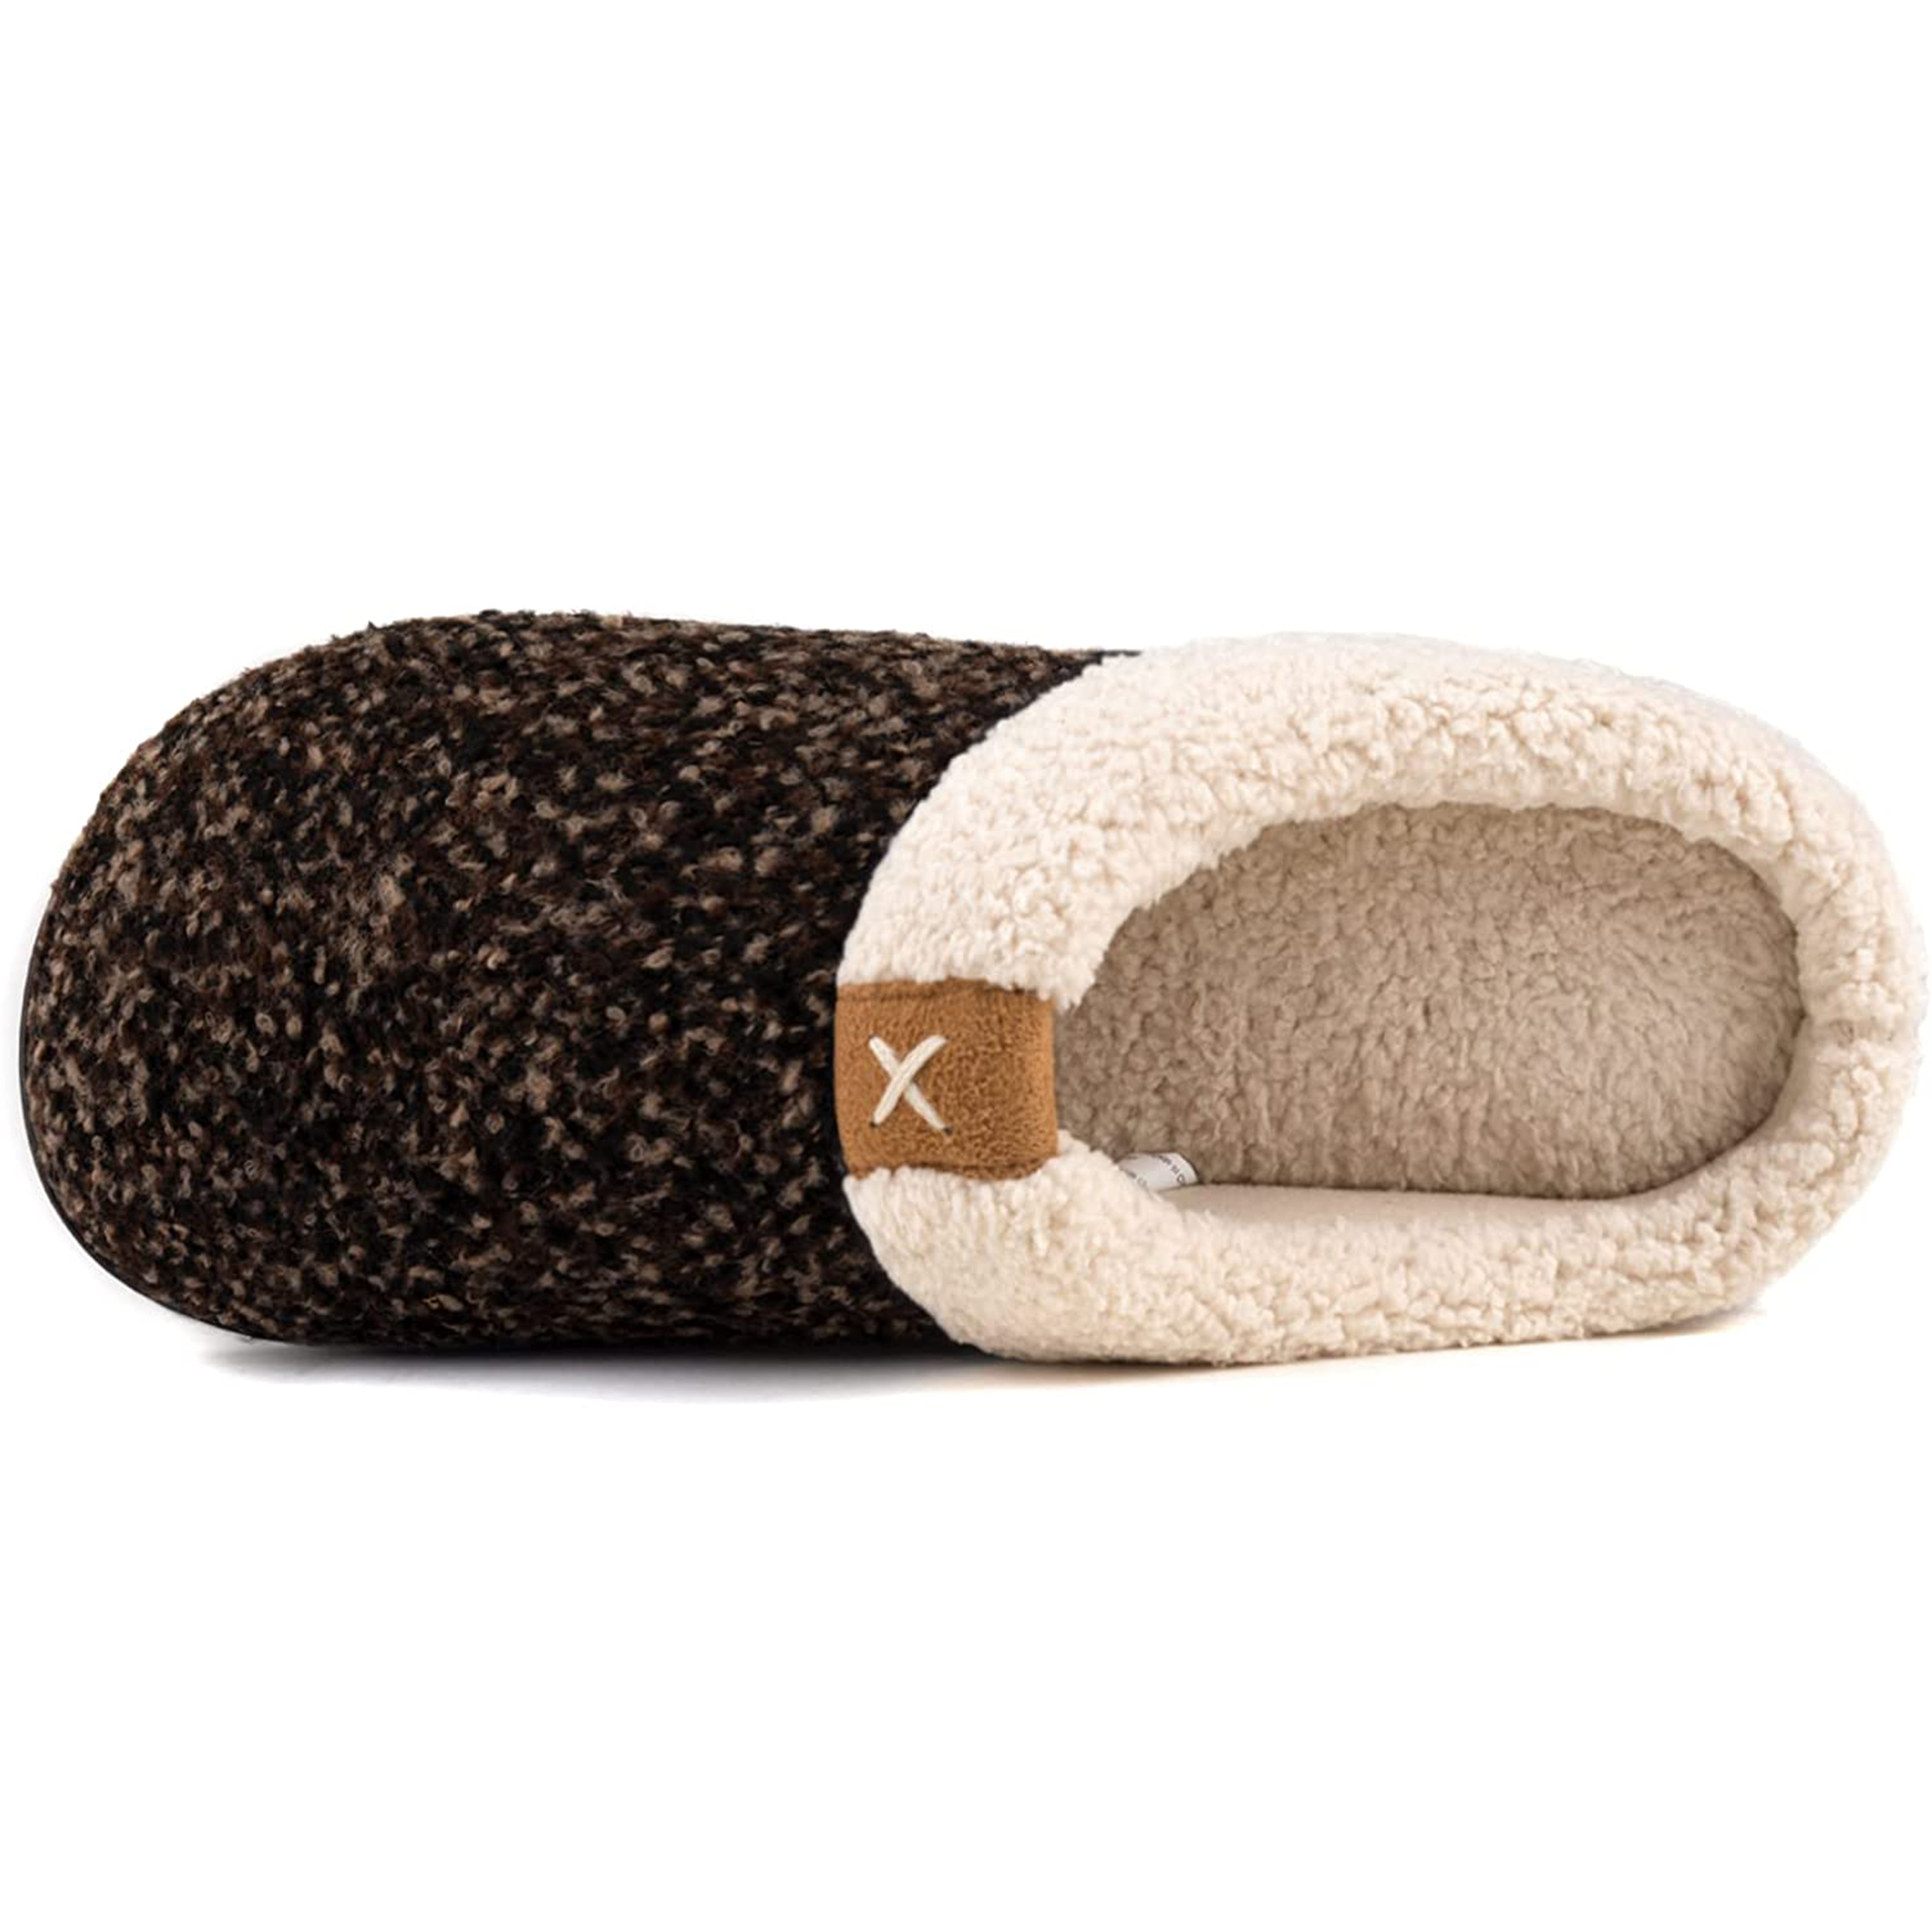 Men's Cozy Memory Foam Slippers with Fuzzy Plush Wool-Like Lining, Slip on Clog House Shoes with Indoor Outdoor Anti-Skid Rubber Sole - image 4 of 5